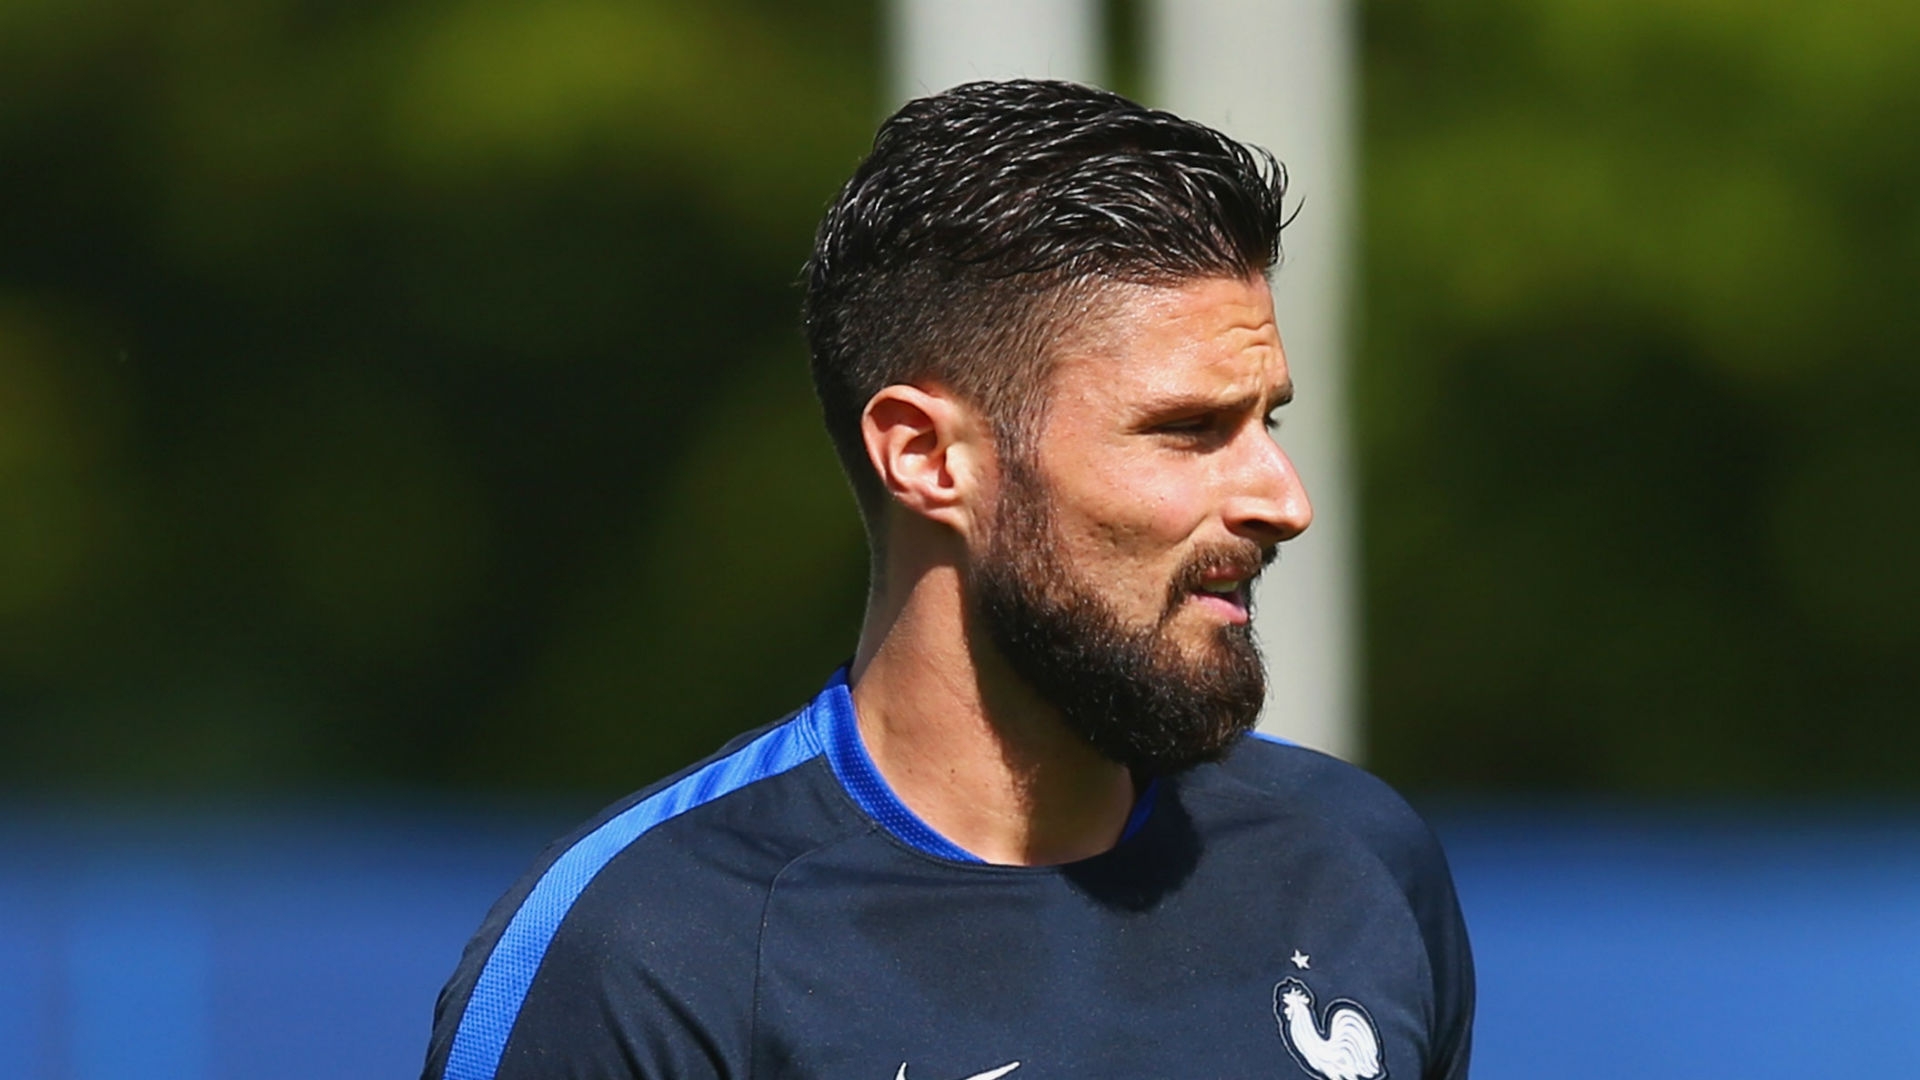 "My future is at Arsenal." says Giroud